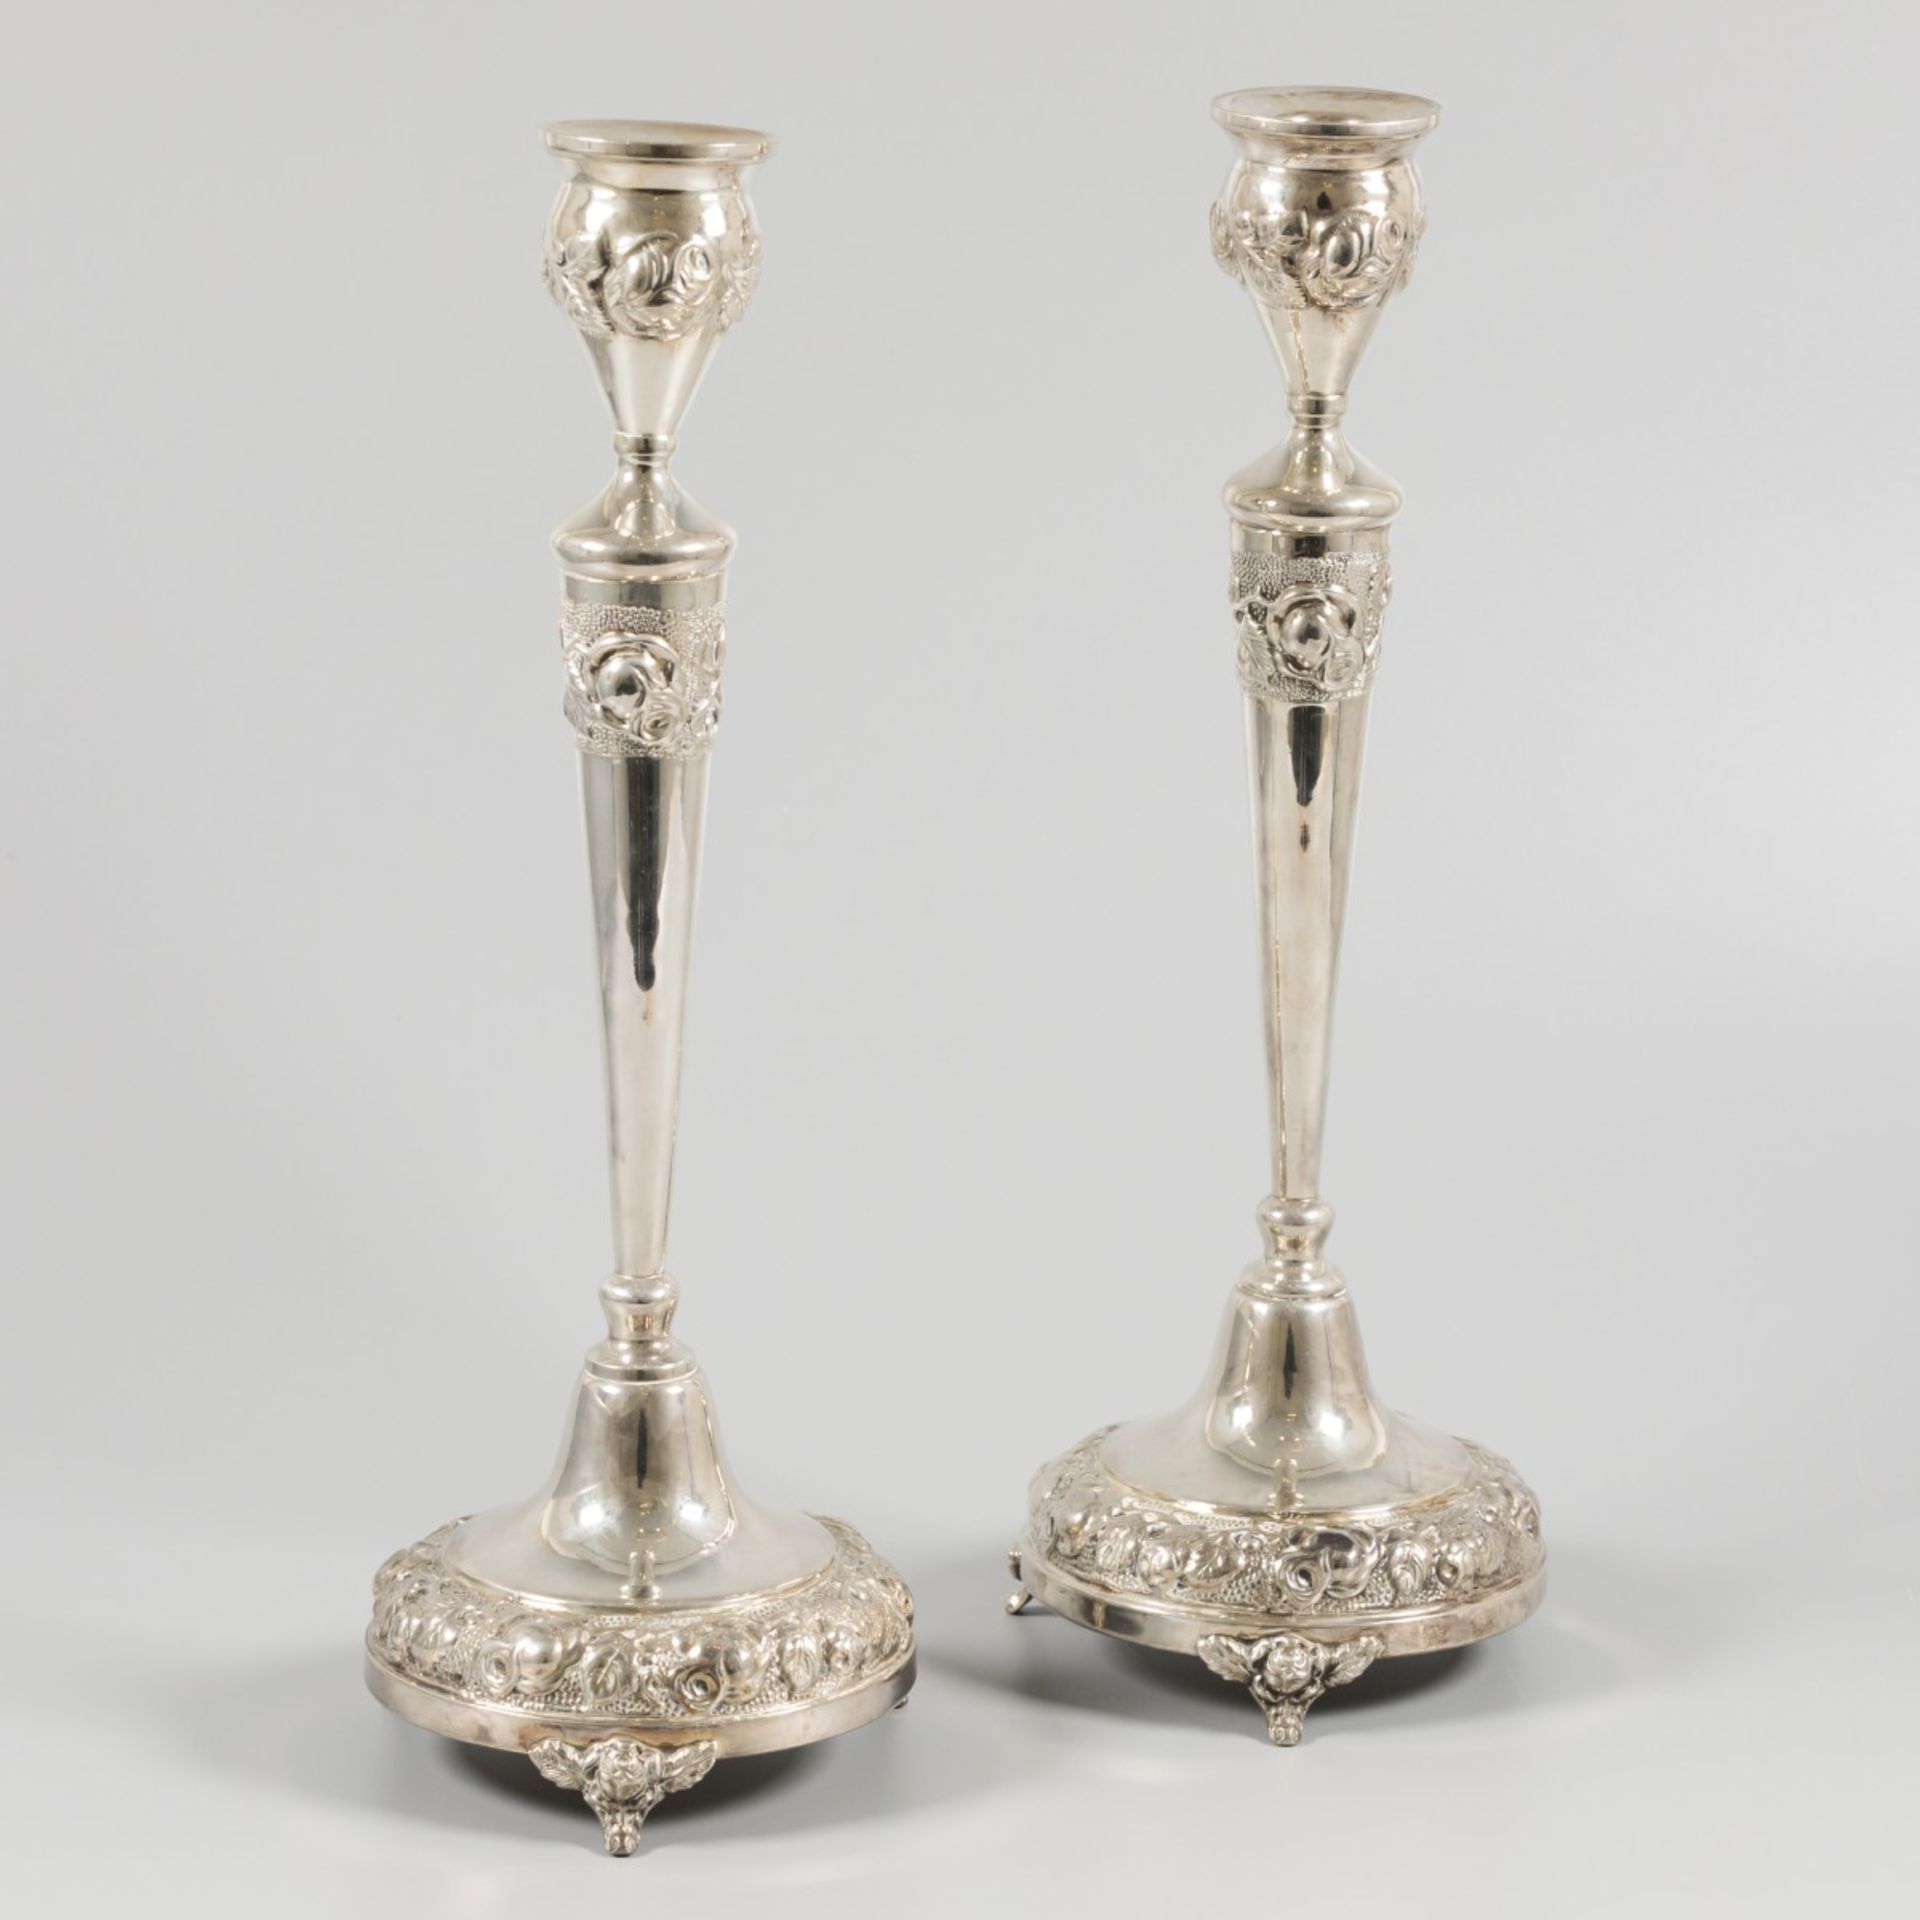 2 piece set of candlesticks silver. - Image 8 of 9